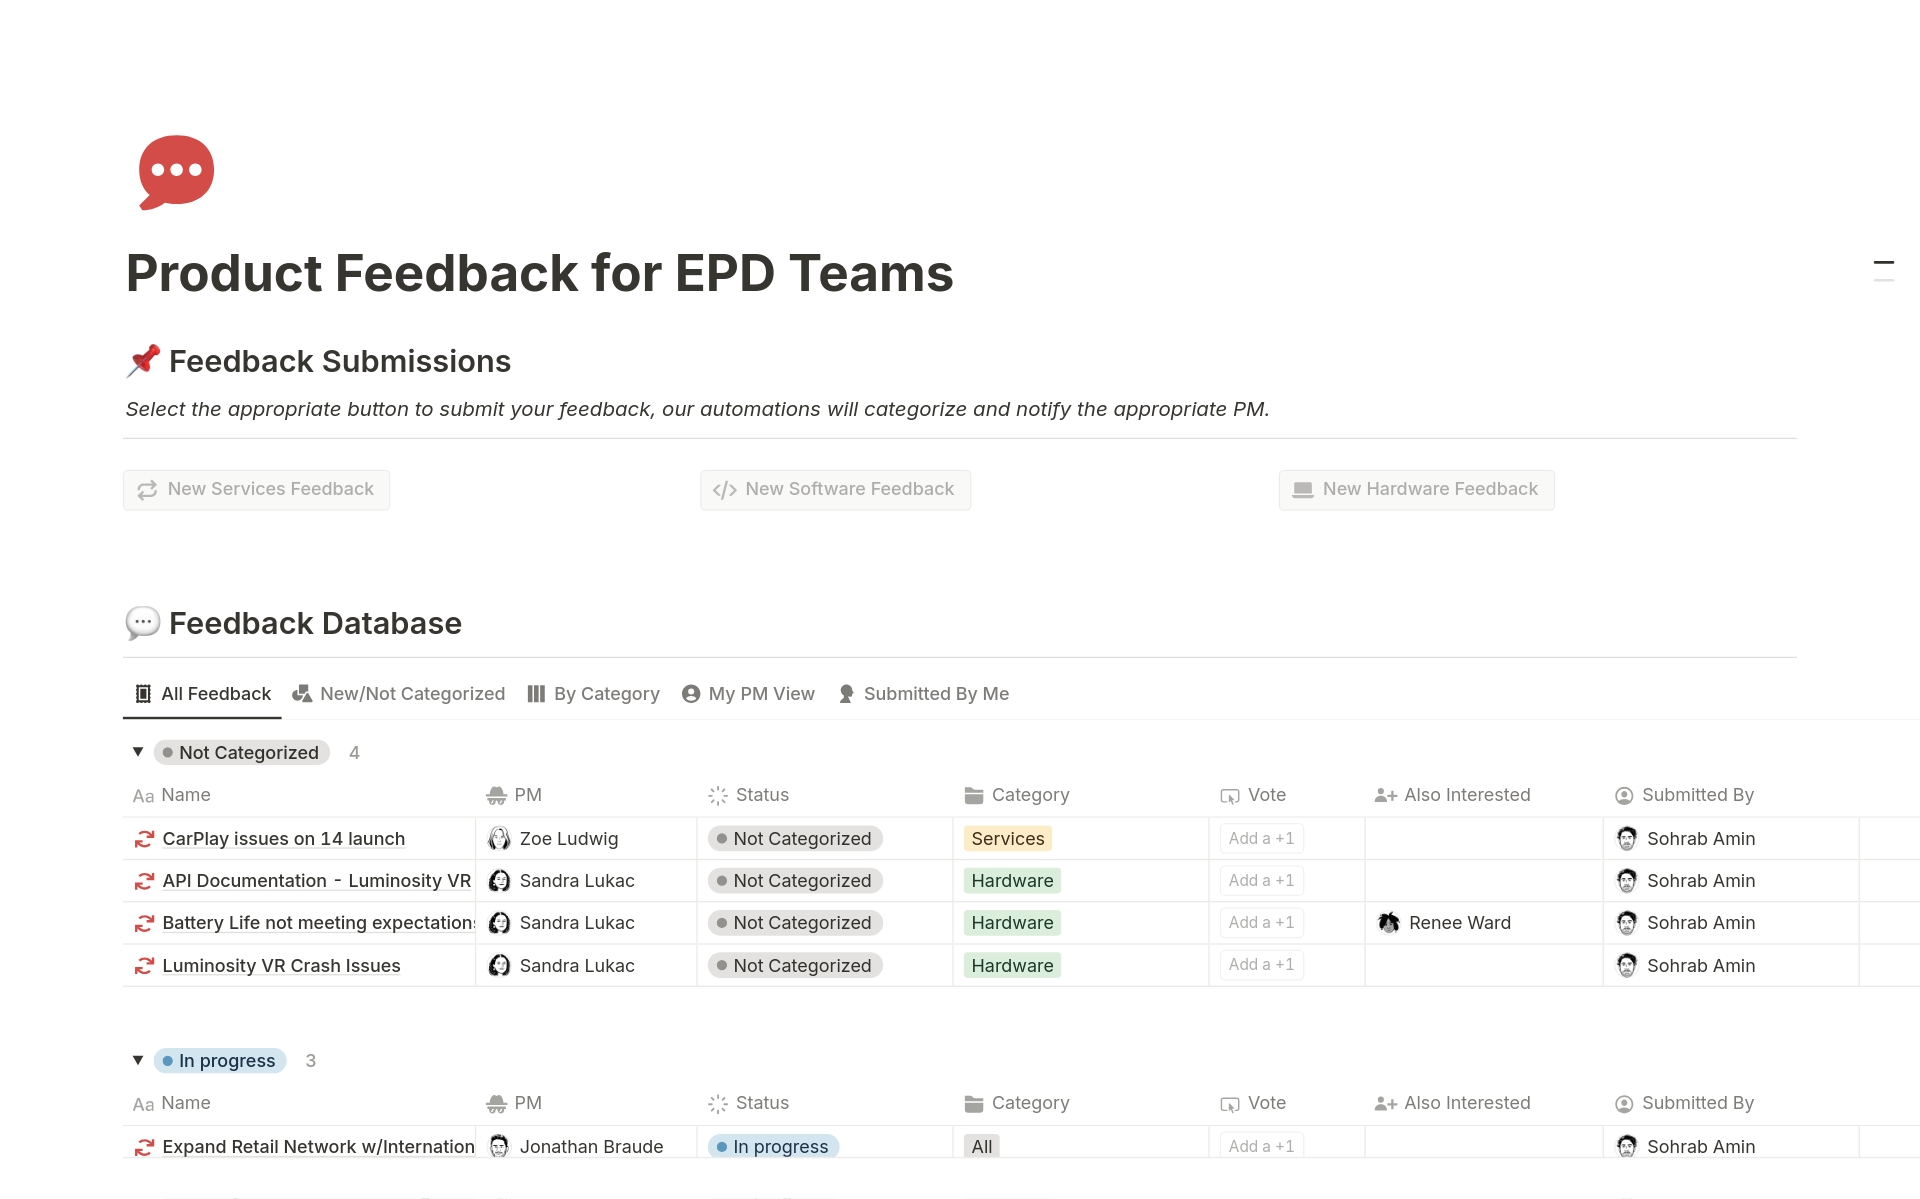 Centralize and streamline product feedback for EPD teams to enhance collaboration and drive improvements efficiently.